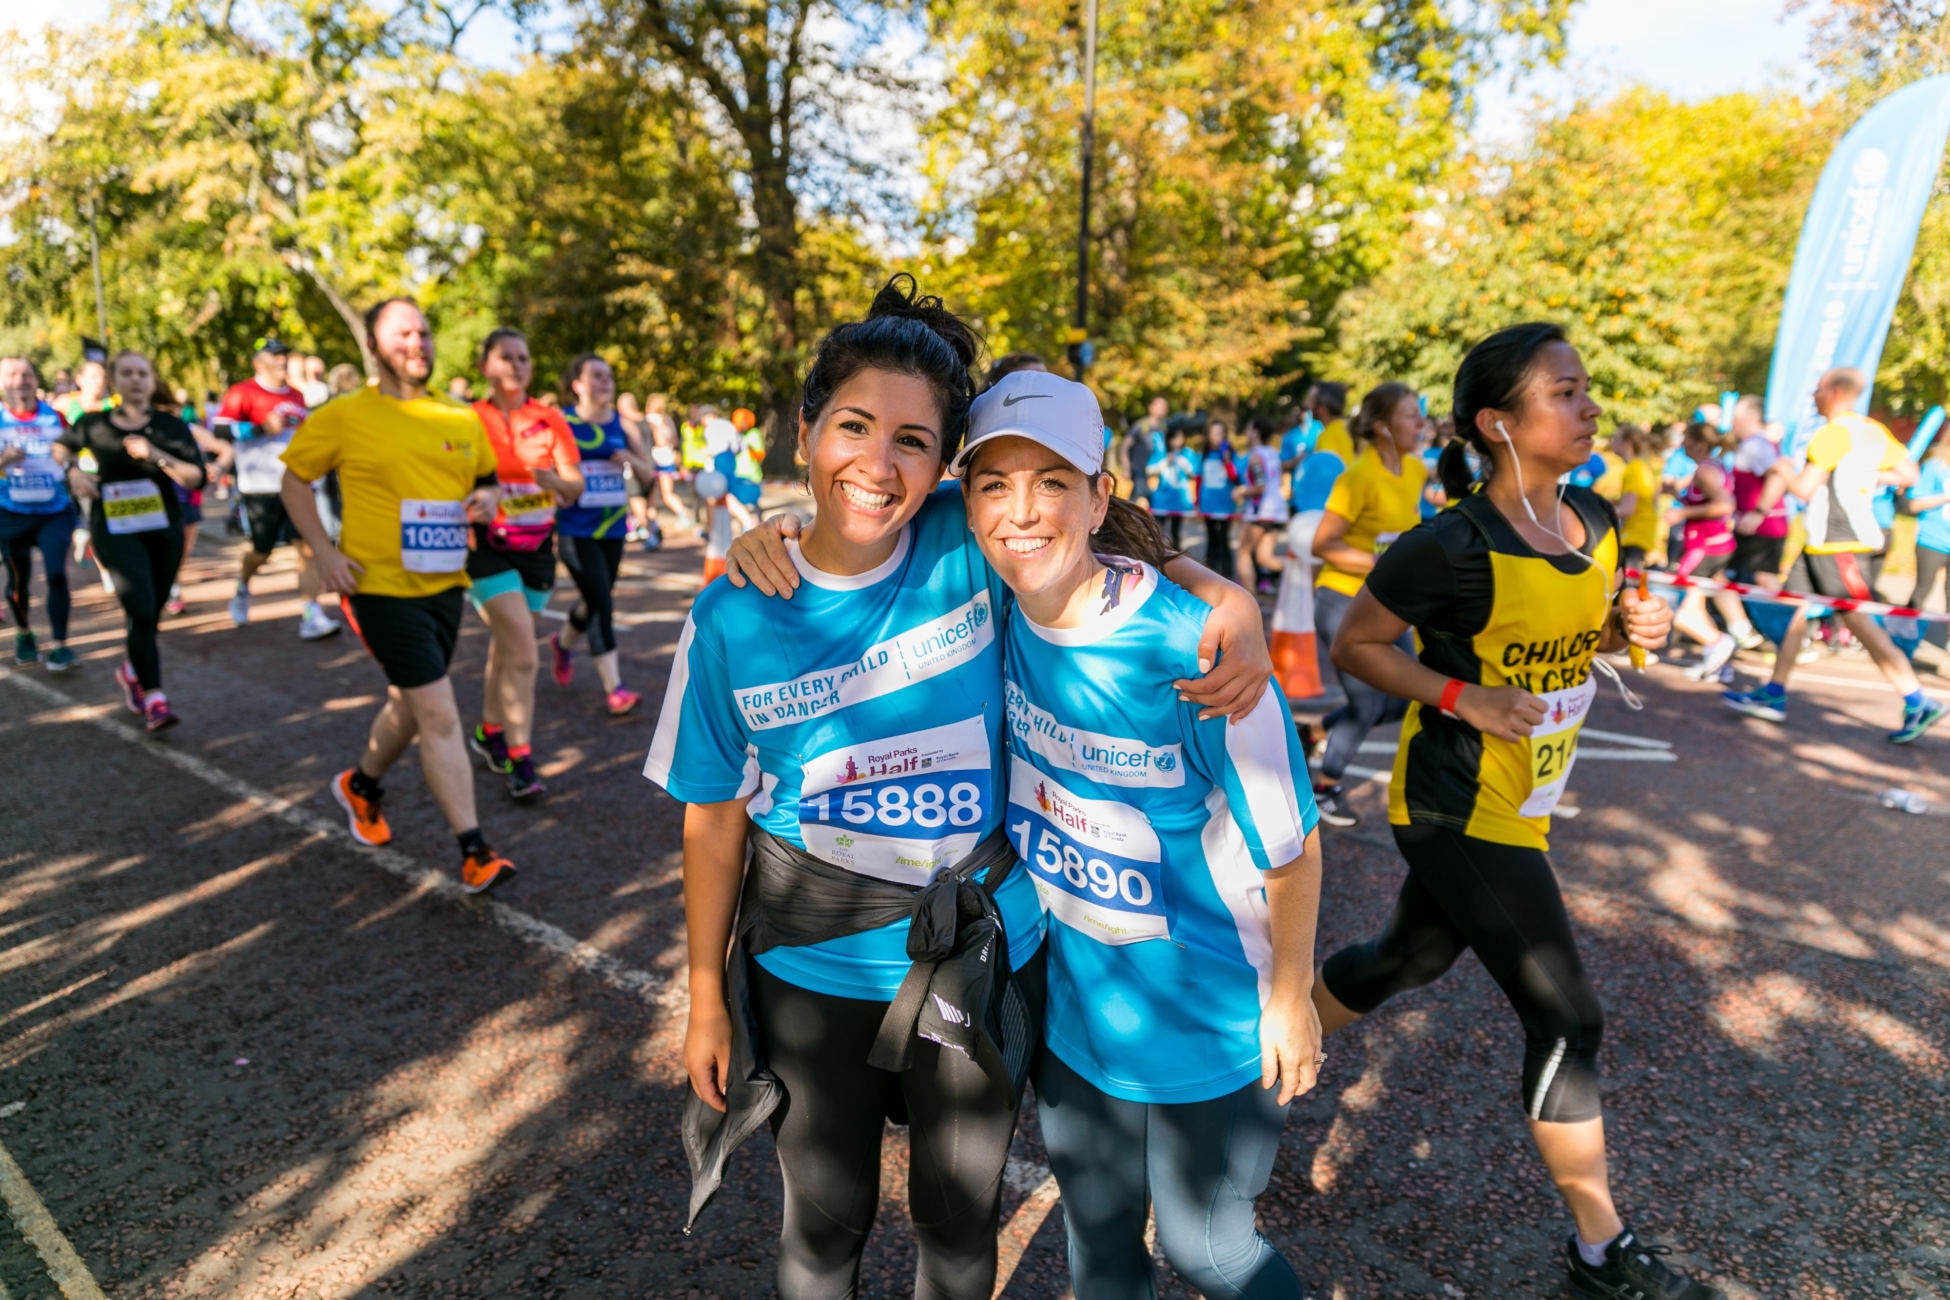 how to raise money for a charity through running